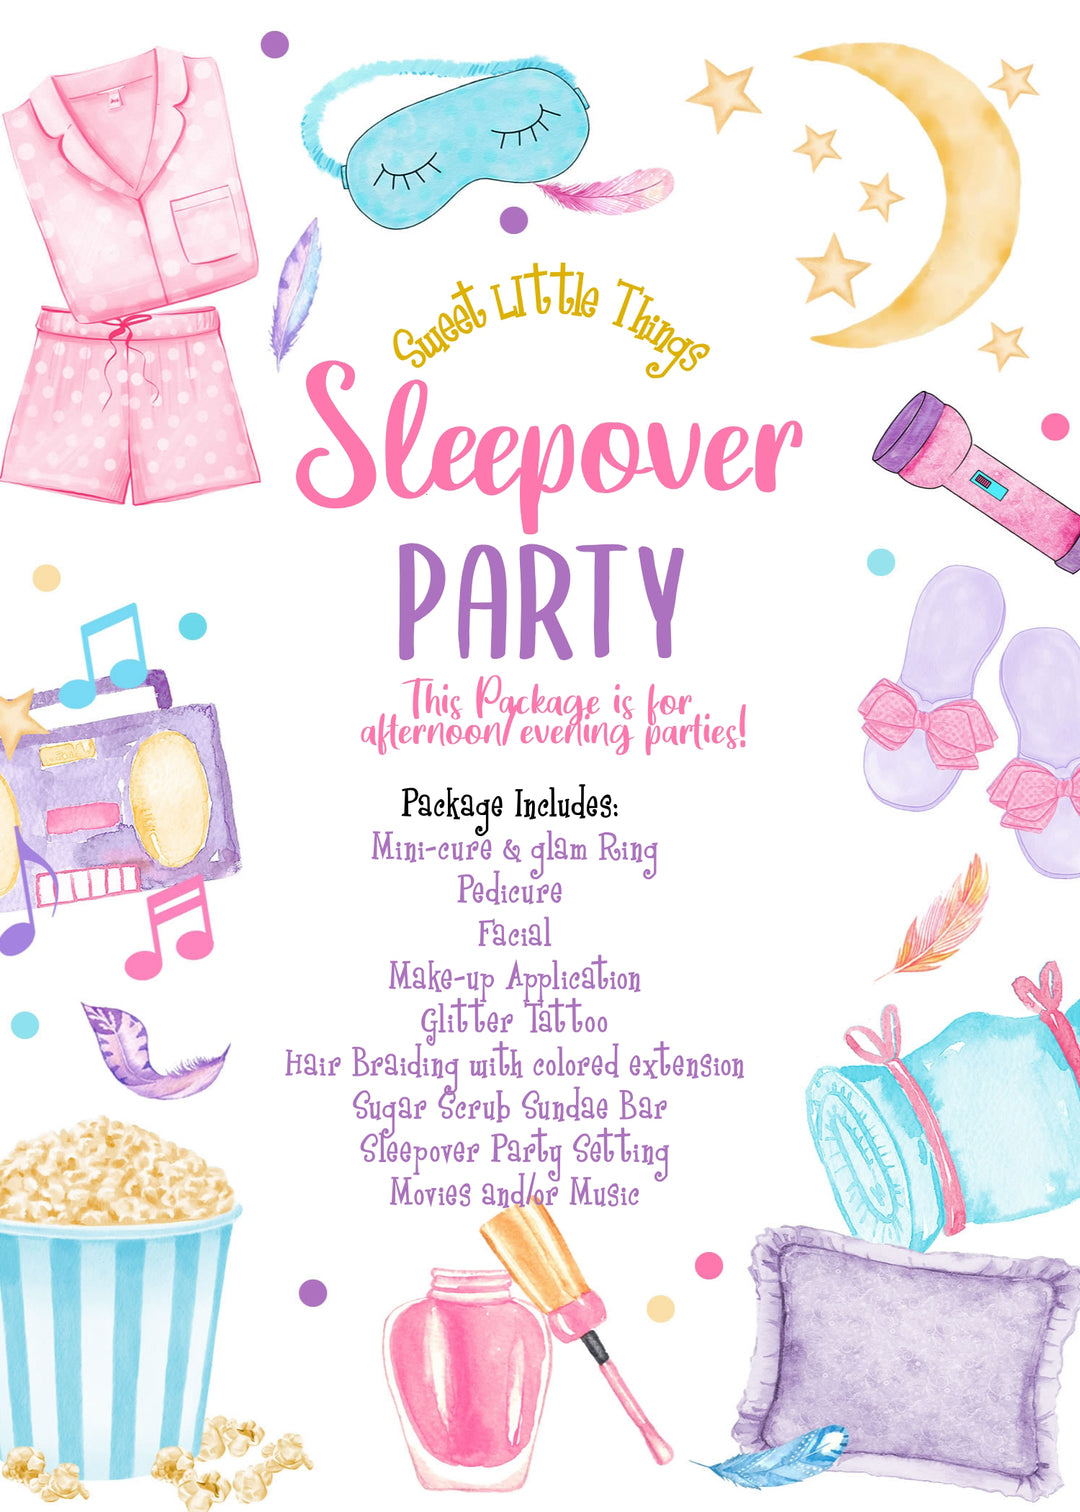 Slumber Party Evening Party Package Includes 6 Girls